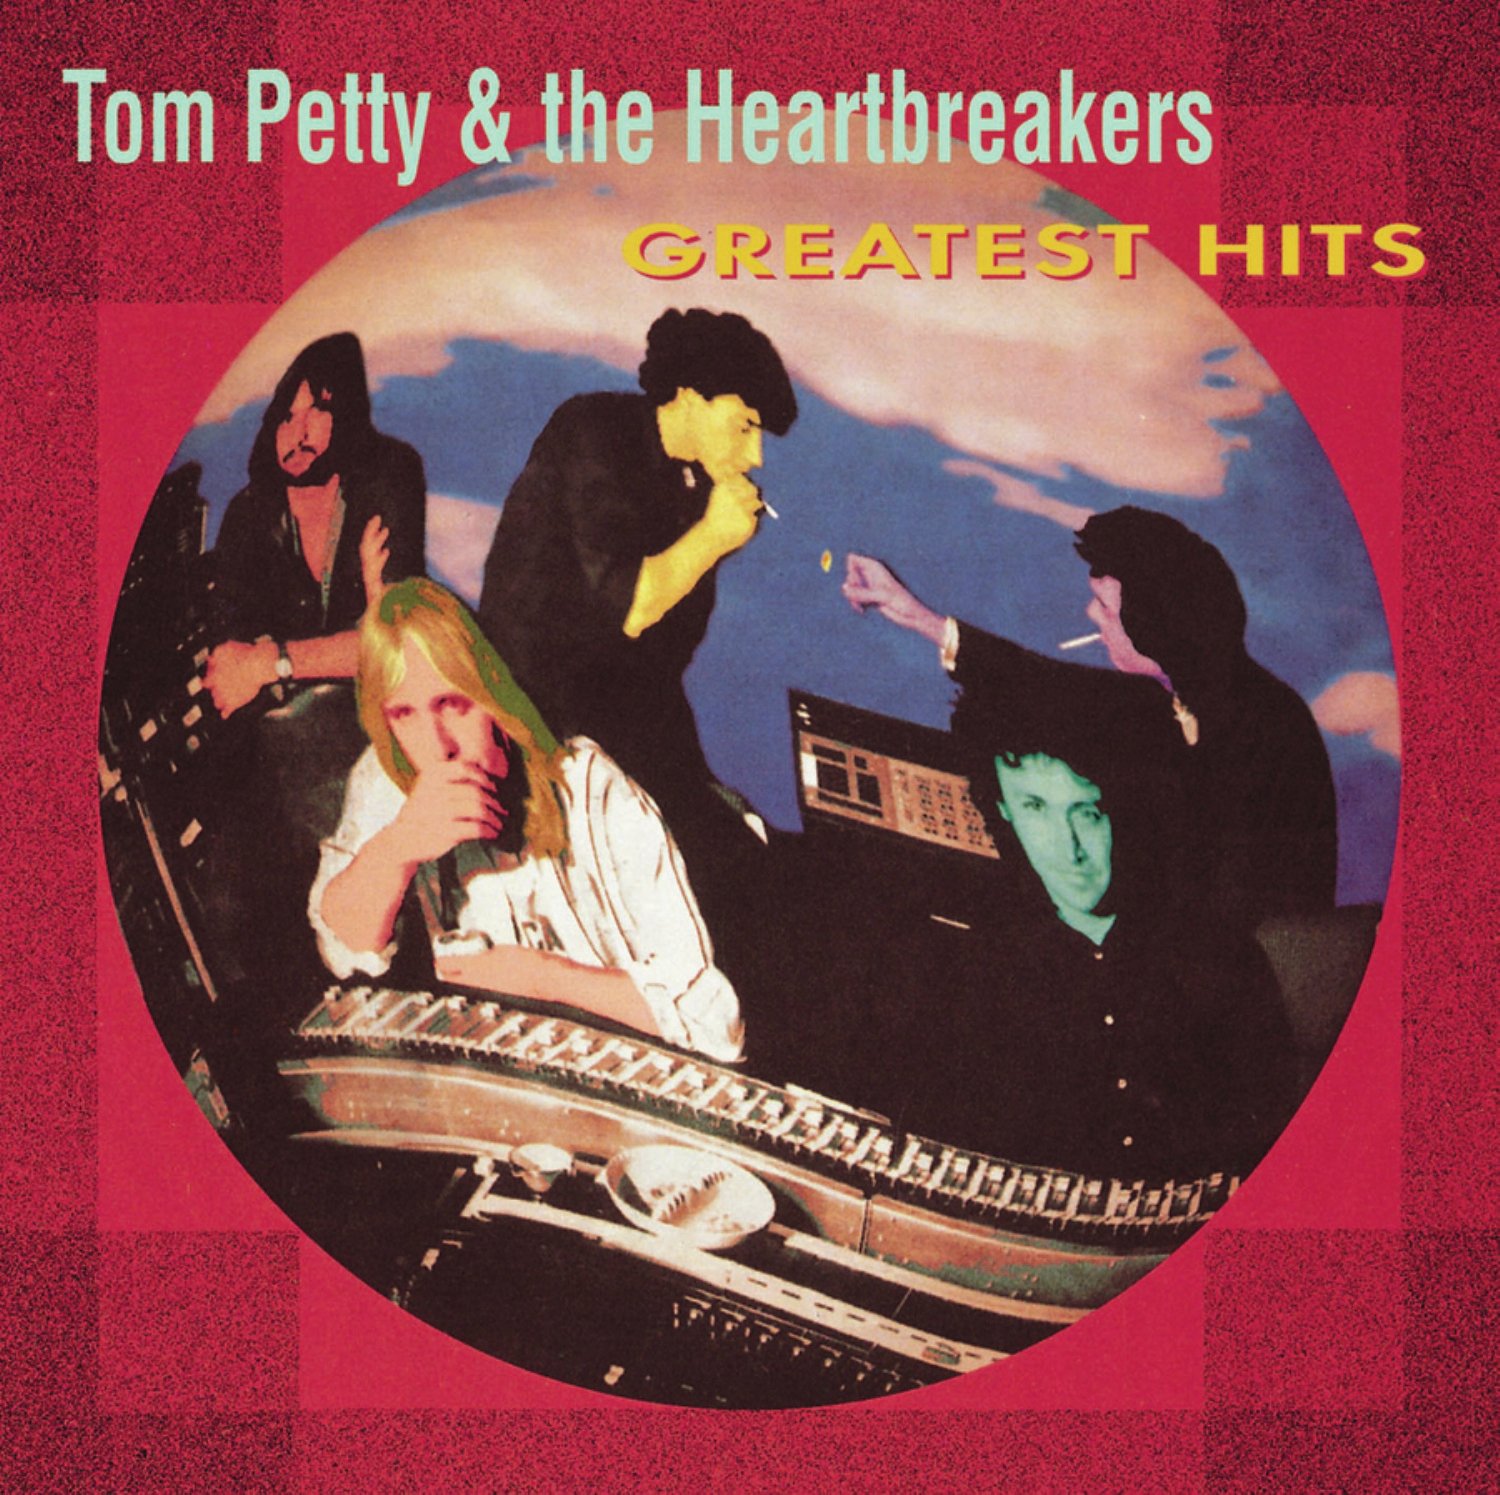 Tom Petty and the Heartbreakers Greatest Hits Vinyl Review